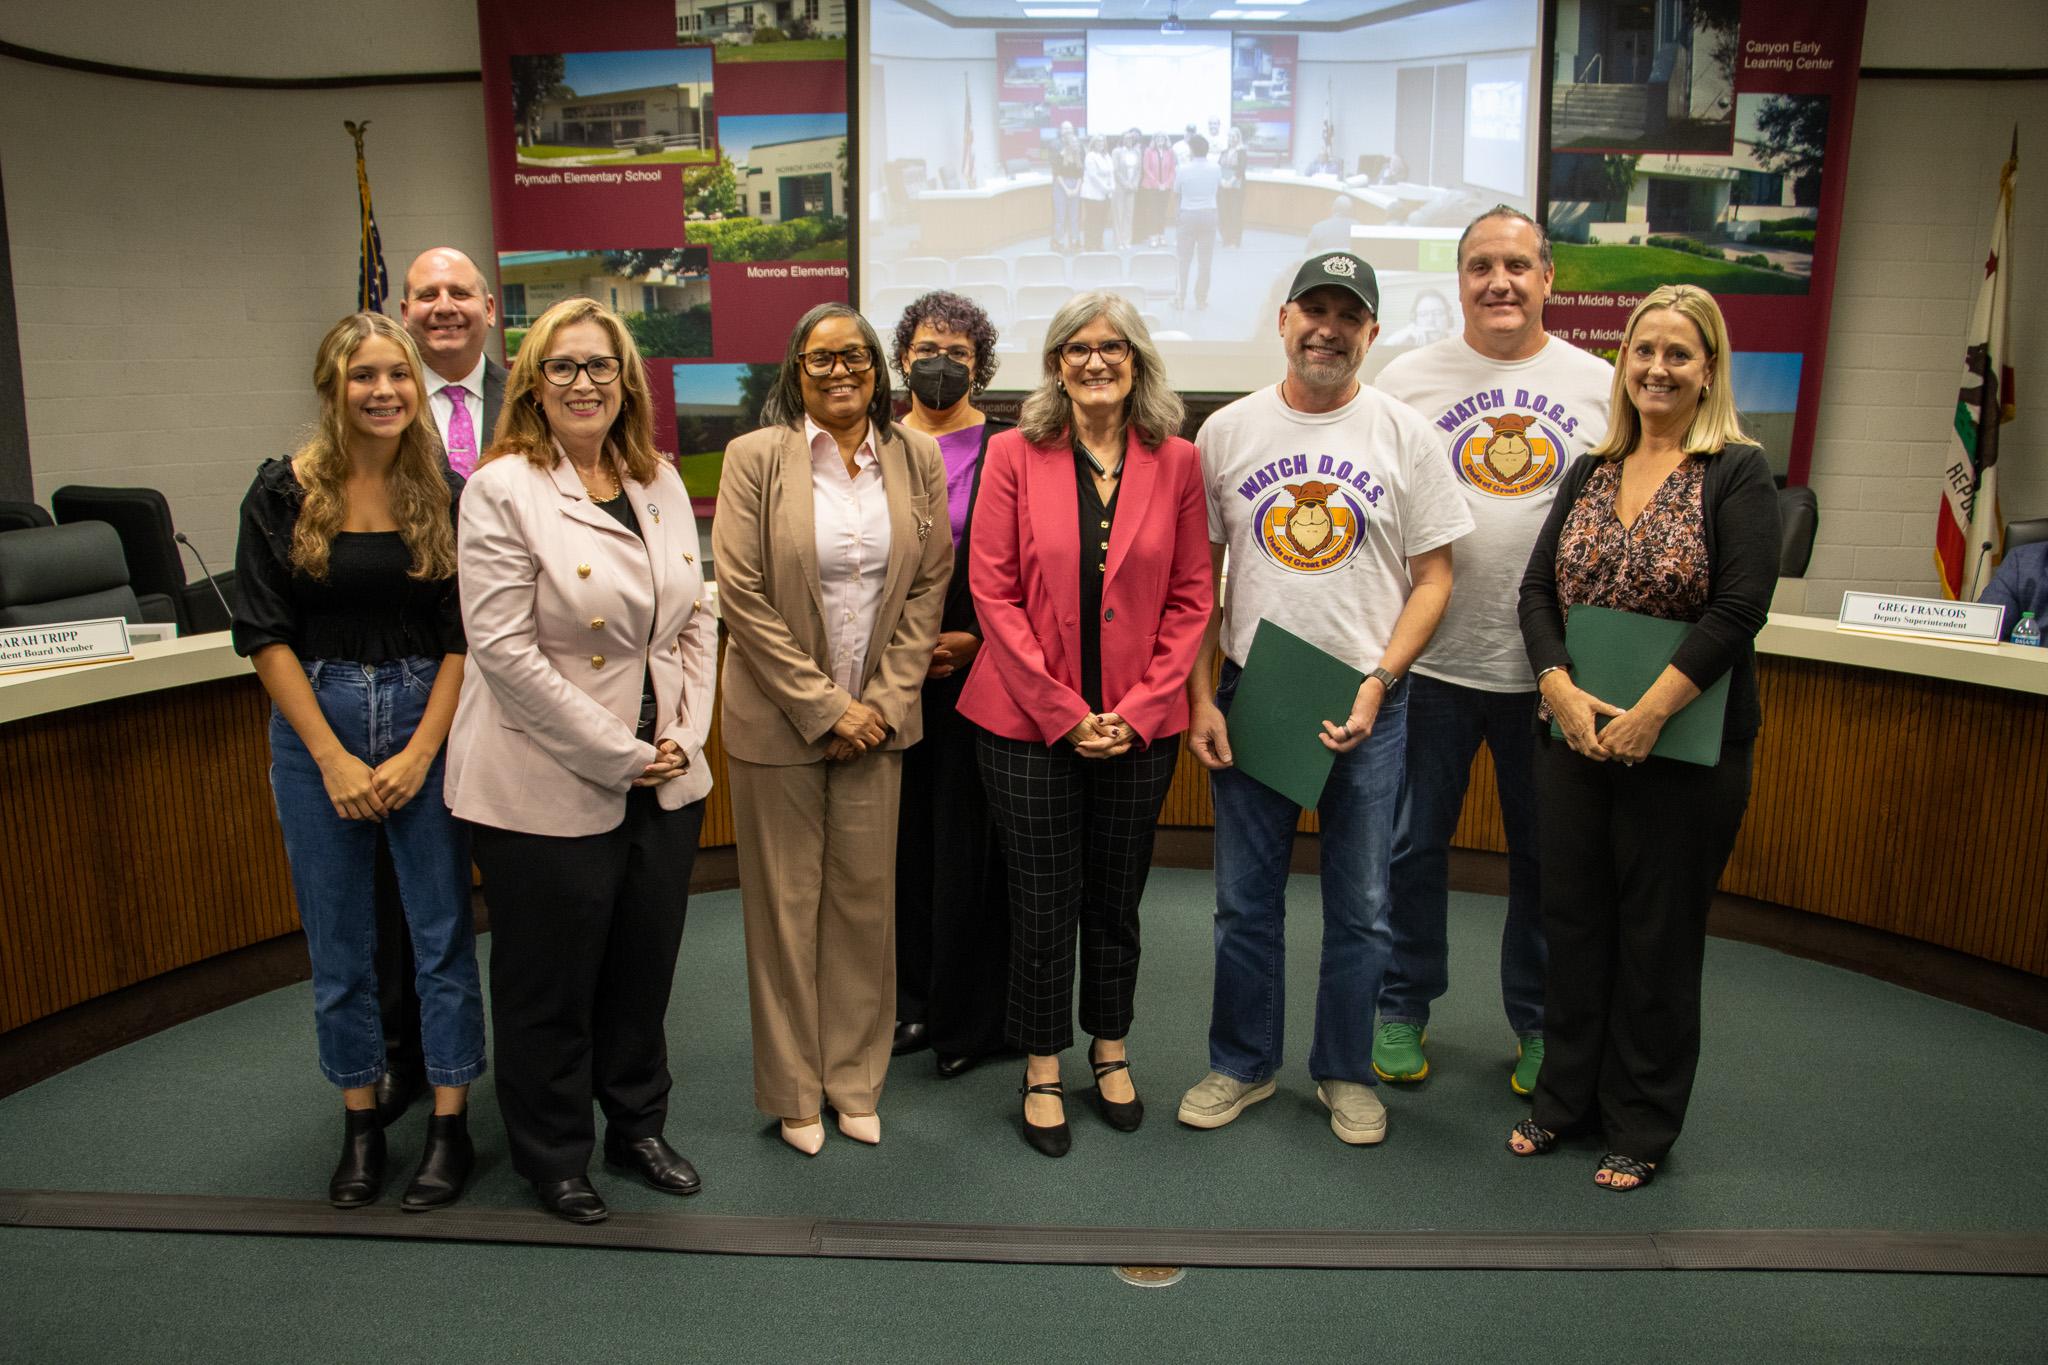 Board Members recognized the WATCH D.O.G.S. (The Dads of Great Students) groups at Bradoaks and Mayflower.